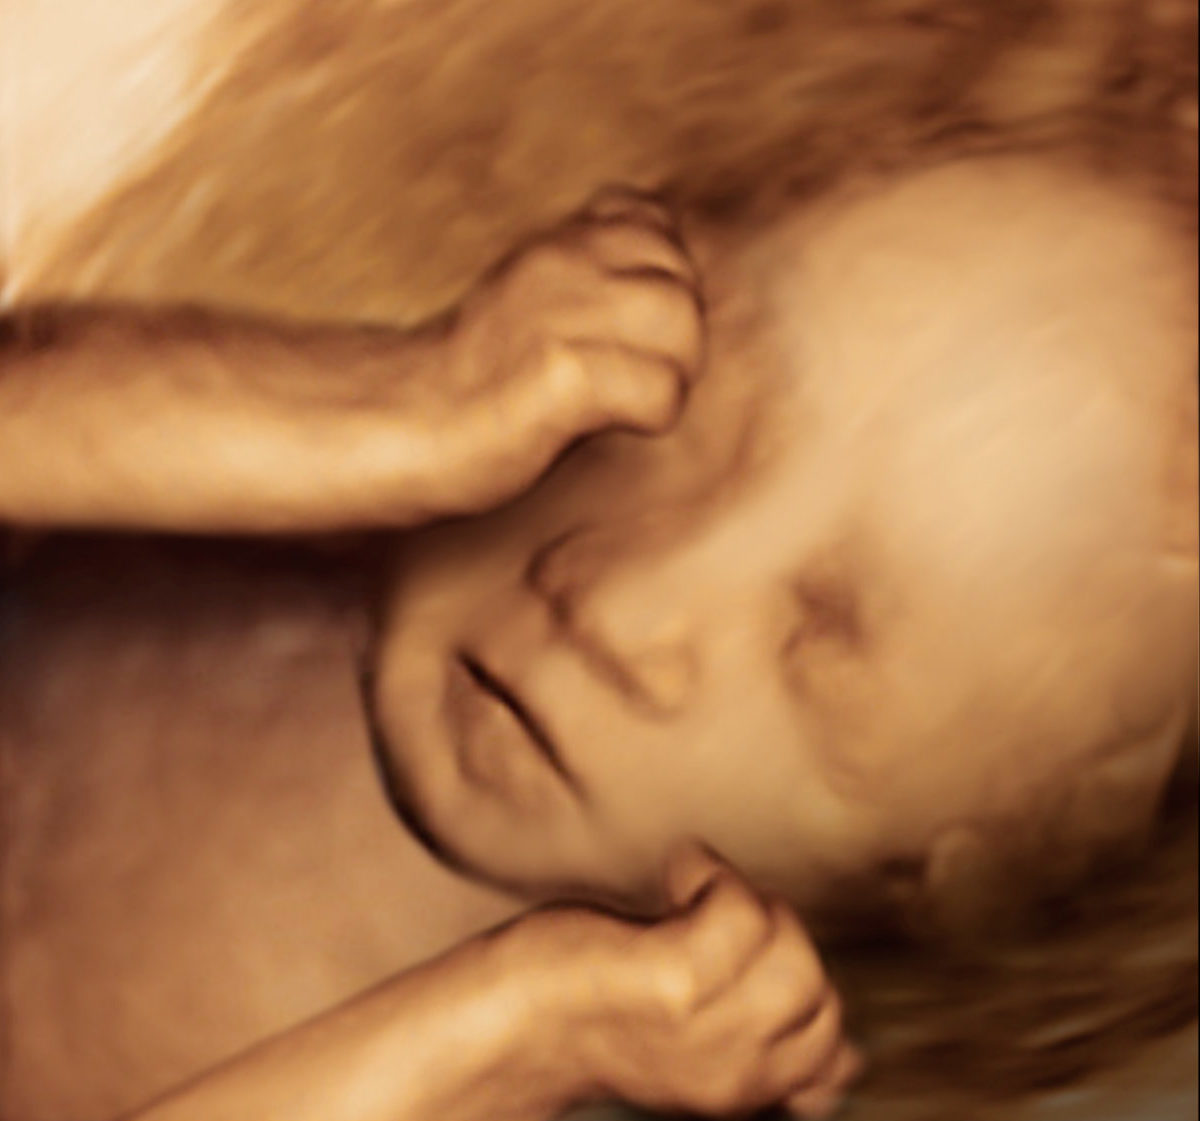 4D scan of IVF baby in womb